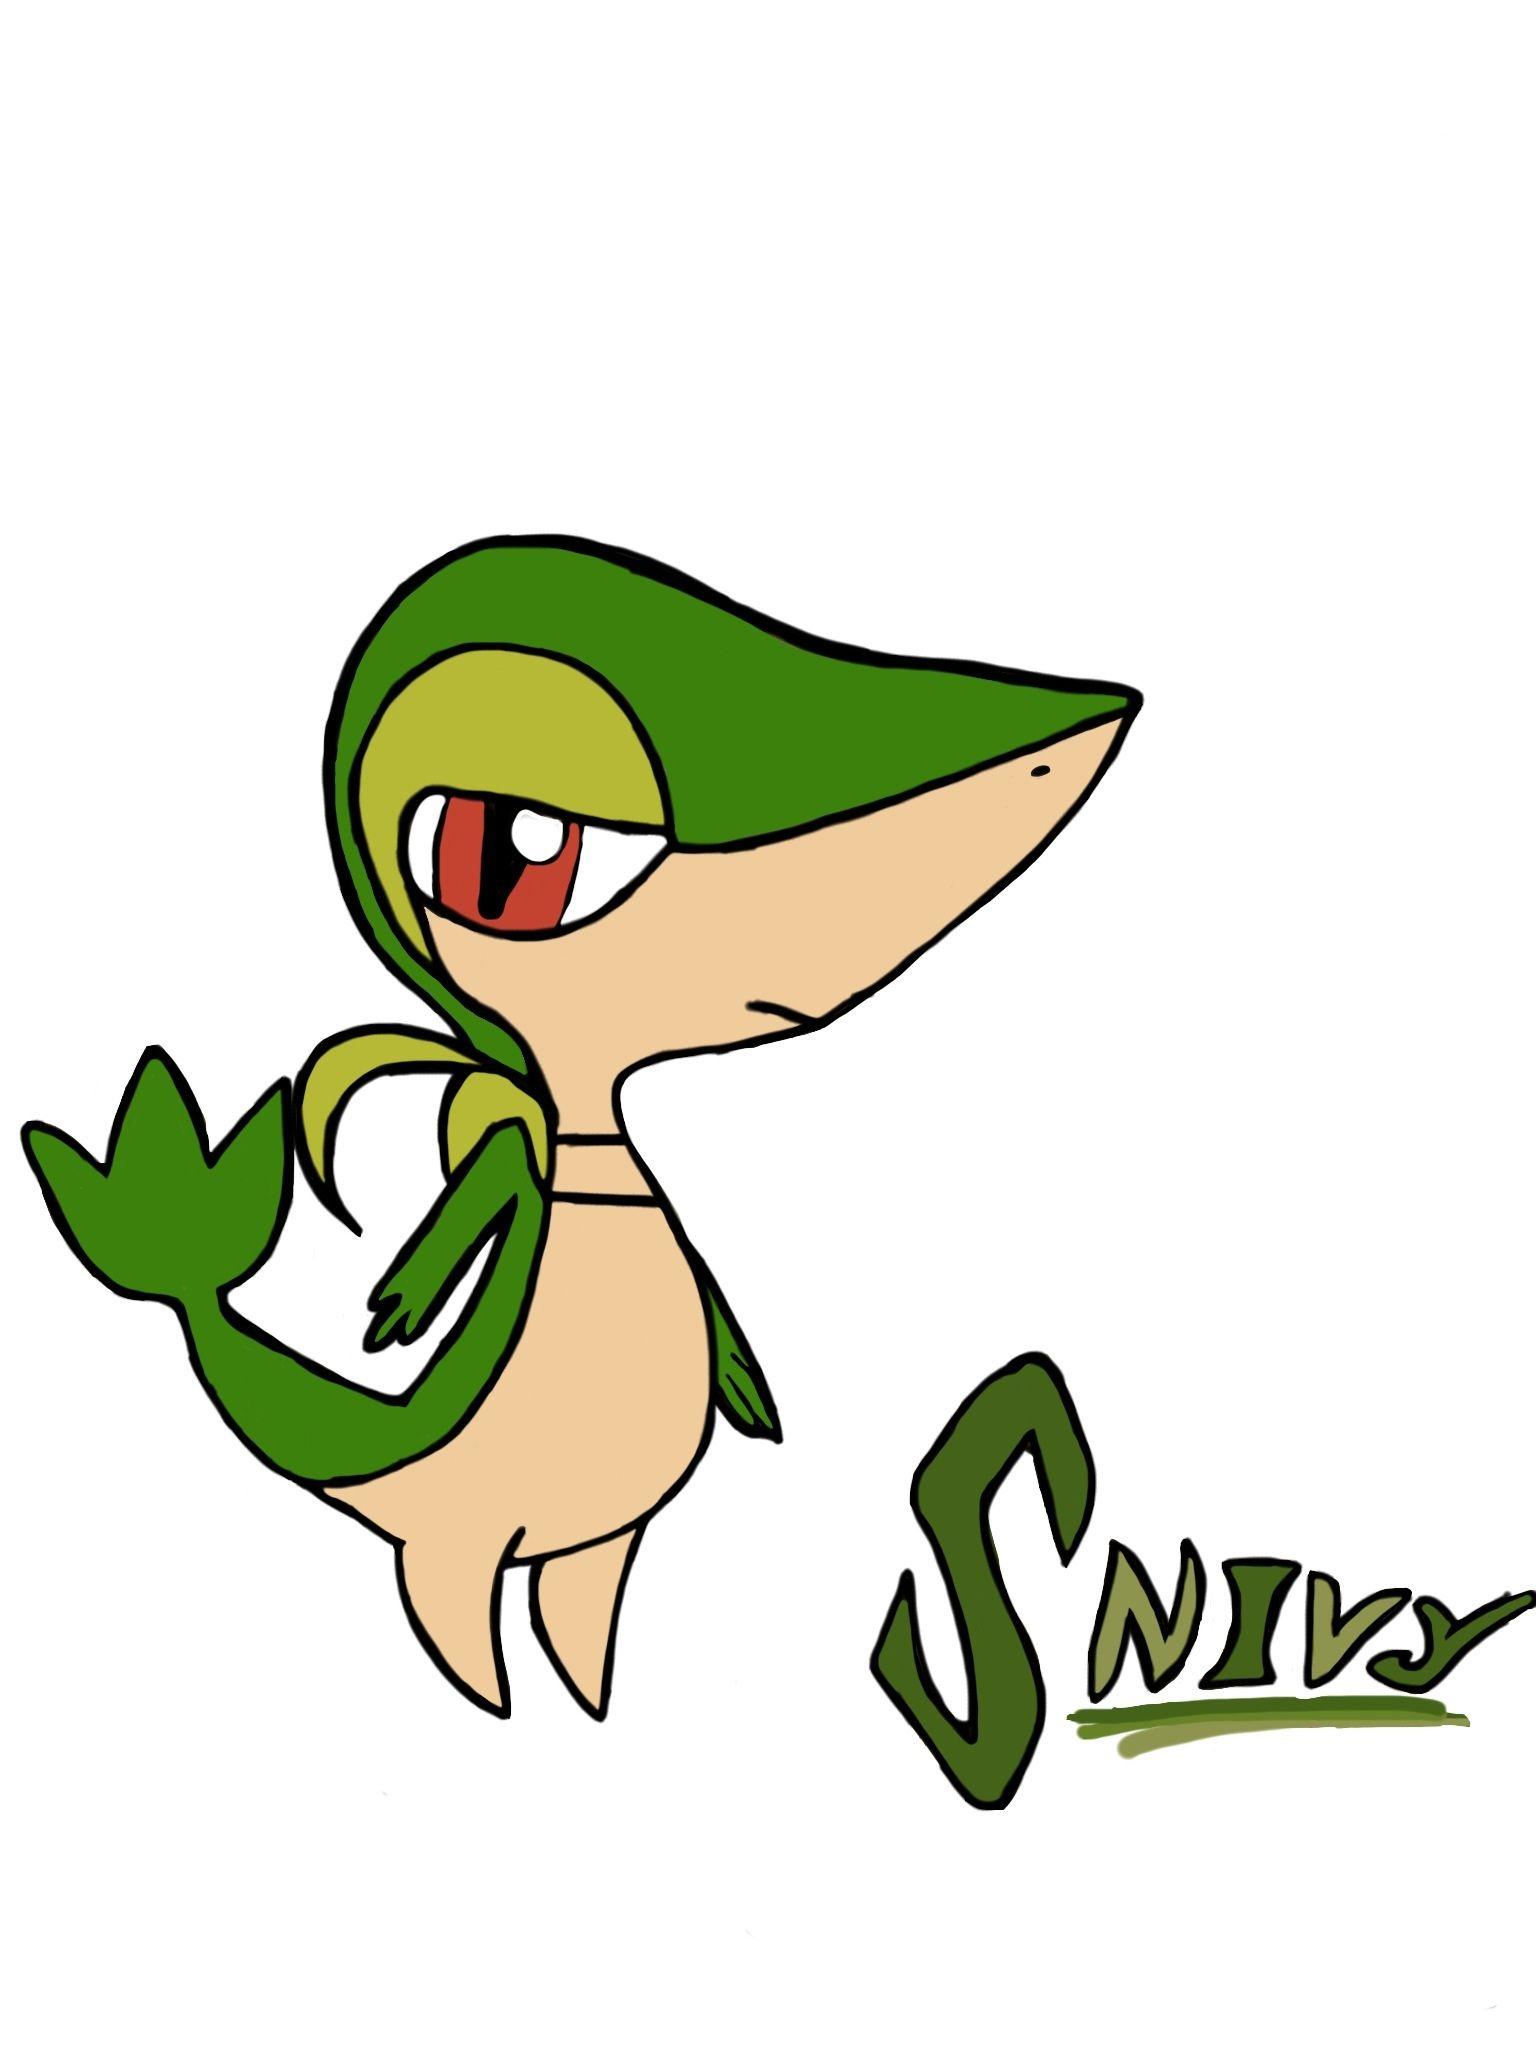 Snivy image Snivy HD wallpaper and background photo